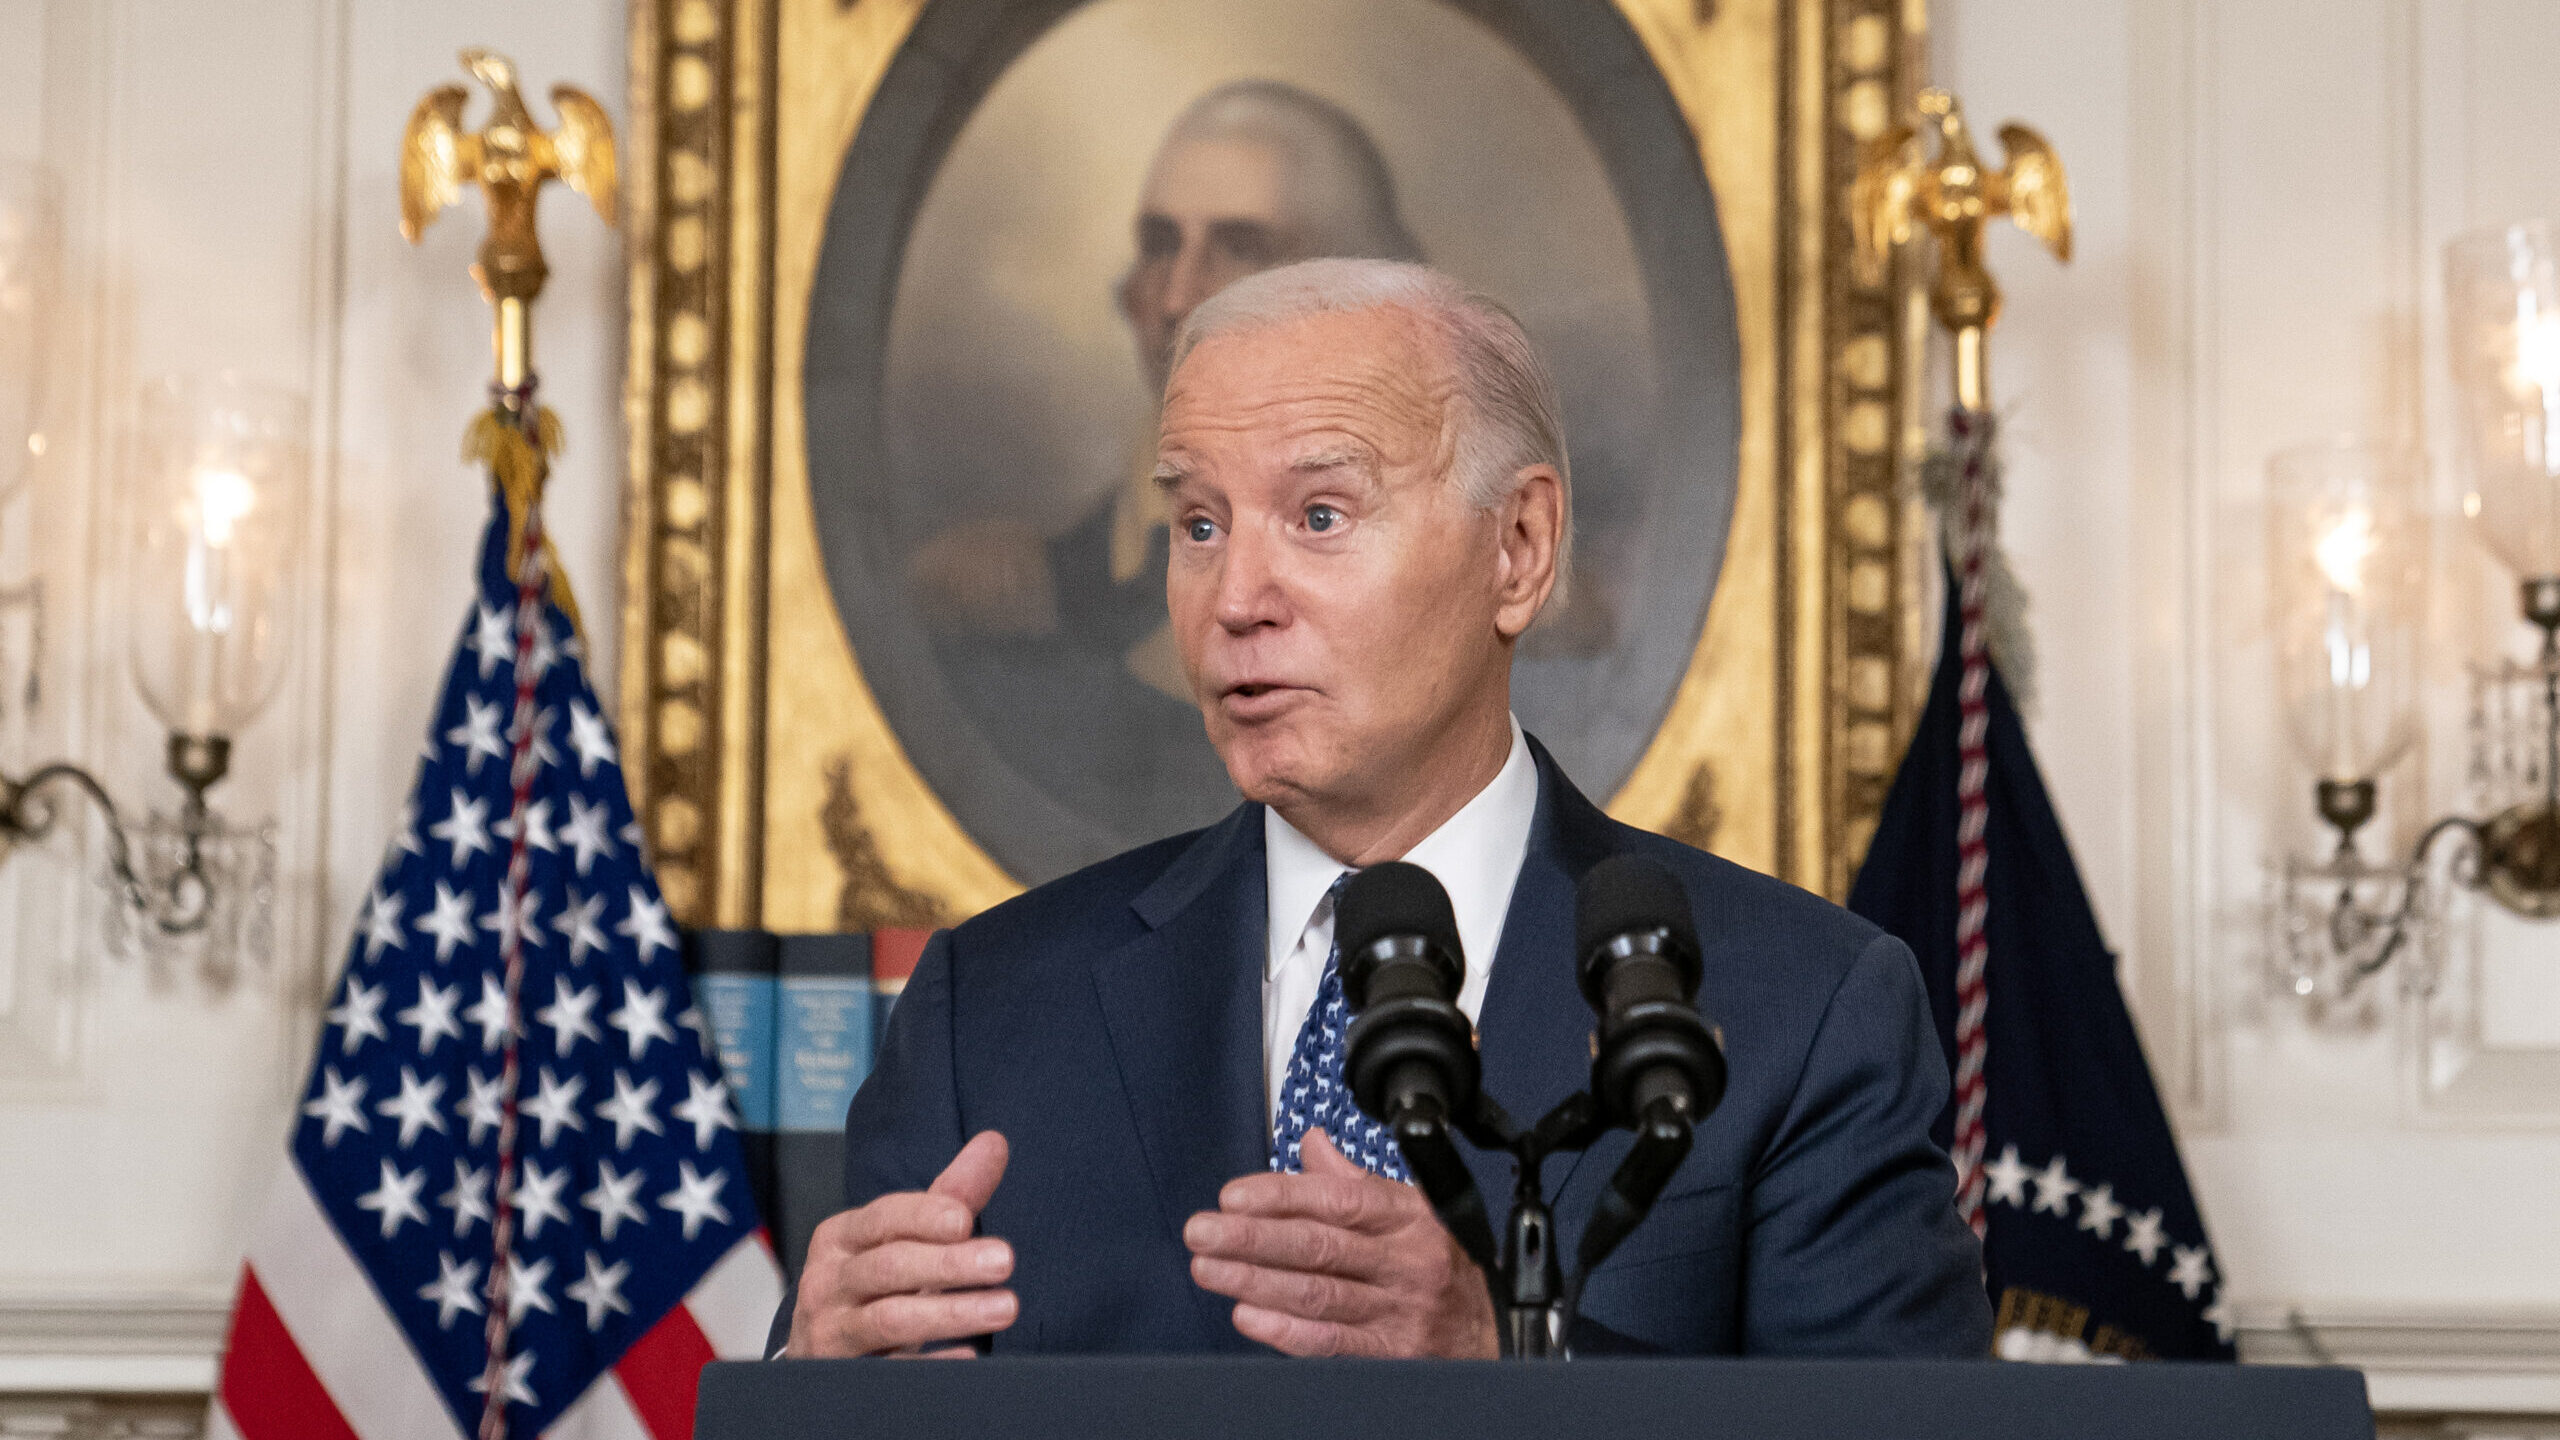 U.S. President Joe Biden delivers remarks in the Diplomatic Reception Room of the White House on Fe...